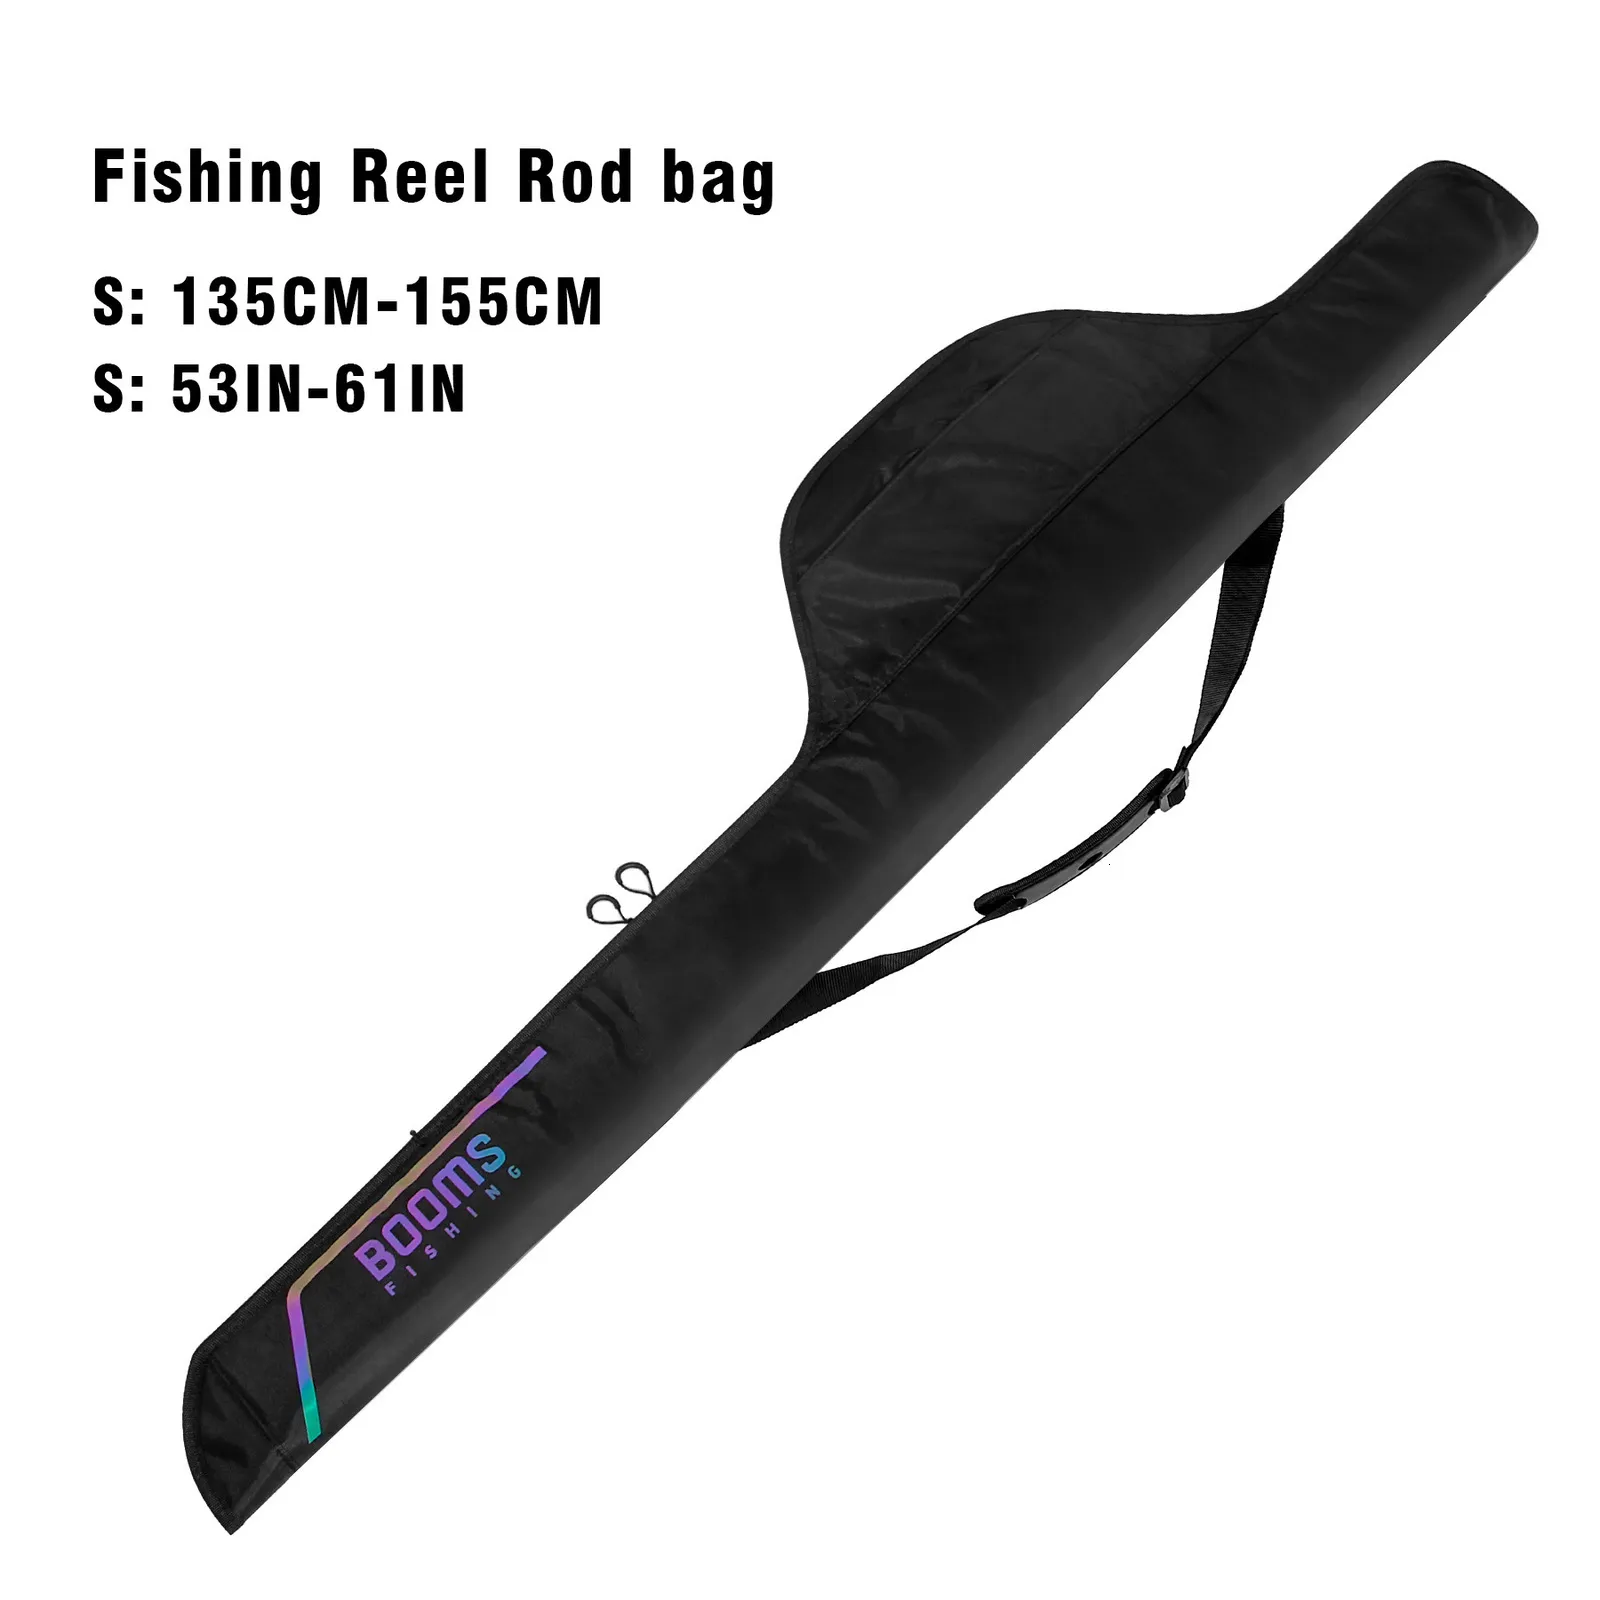 Fishing Accessories Booms Fishing PB3 Fishing Rod Bag Pole Storage Case 130  Cm To 215 Cm Folding Apply To Multi Size Fishing Reel Rods Bags Cases  230718 From Nian07, $21.63